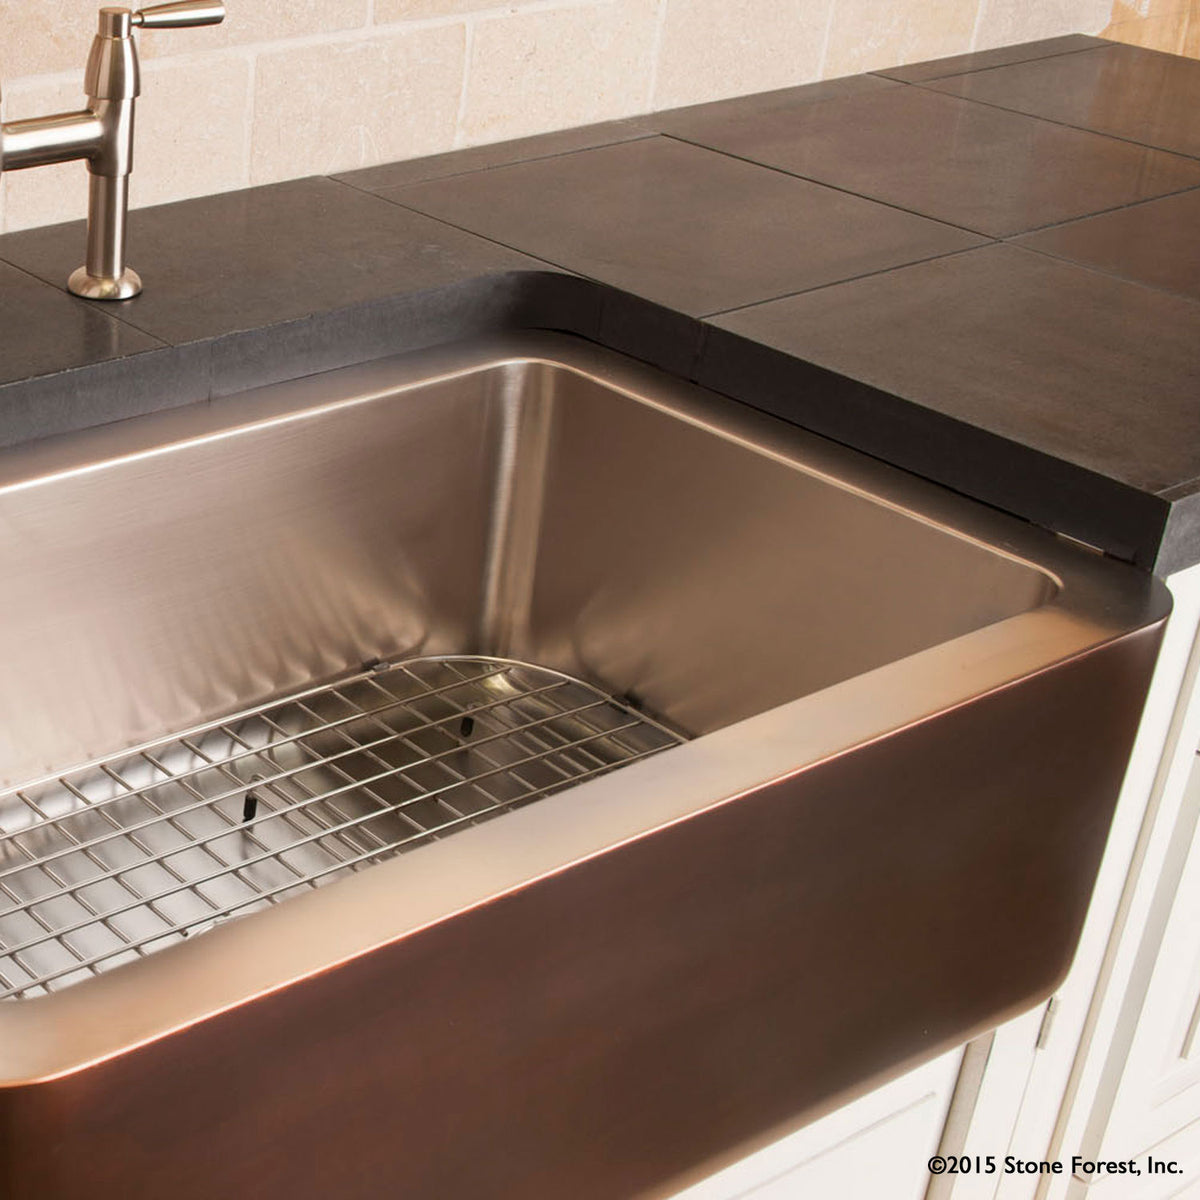 Farmhouse sink with stainless steel interior and copper exterior image 3 of 3